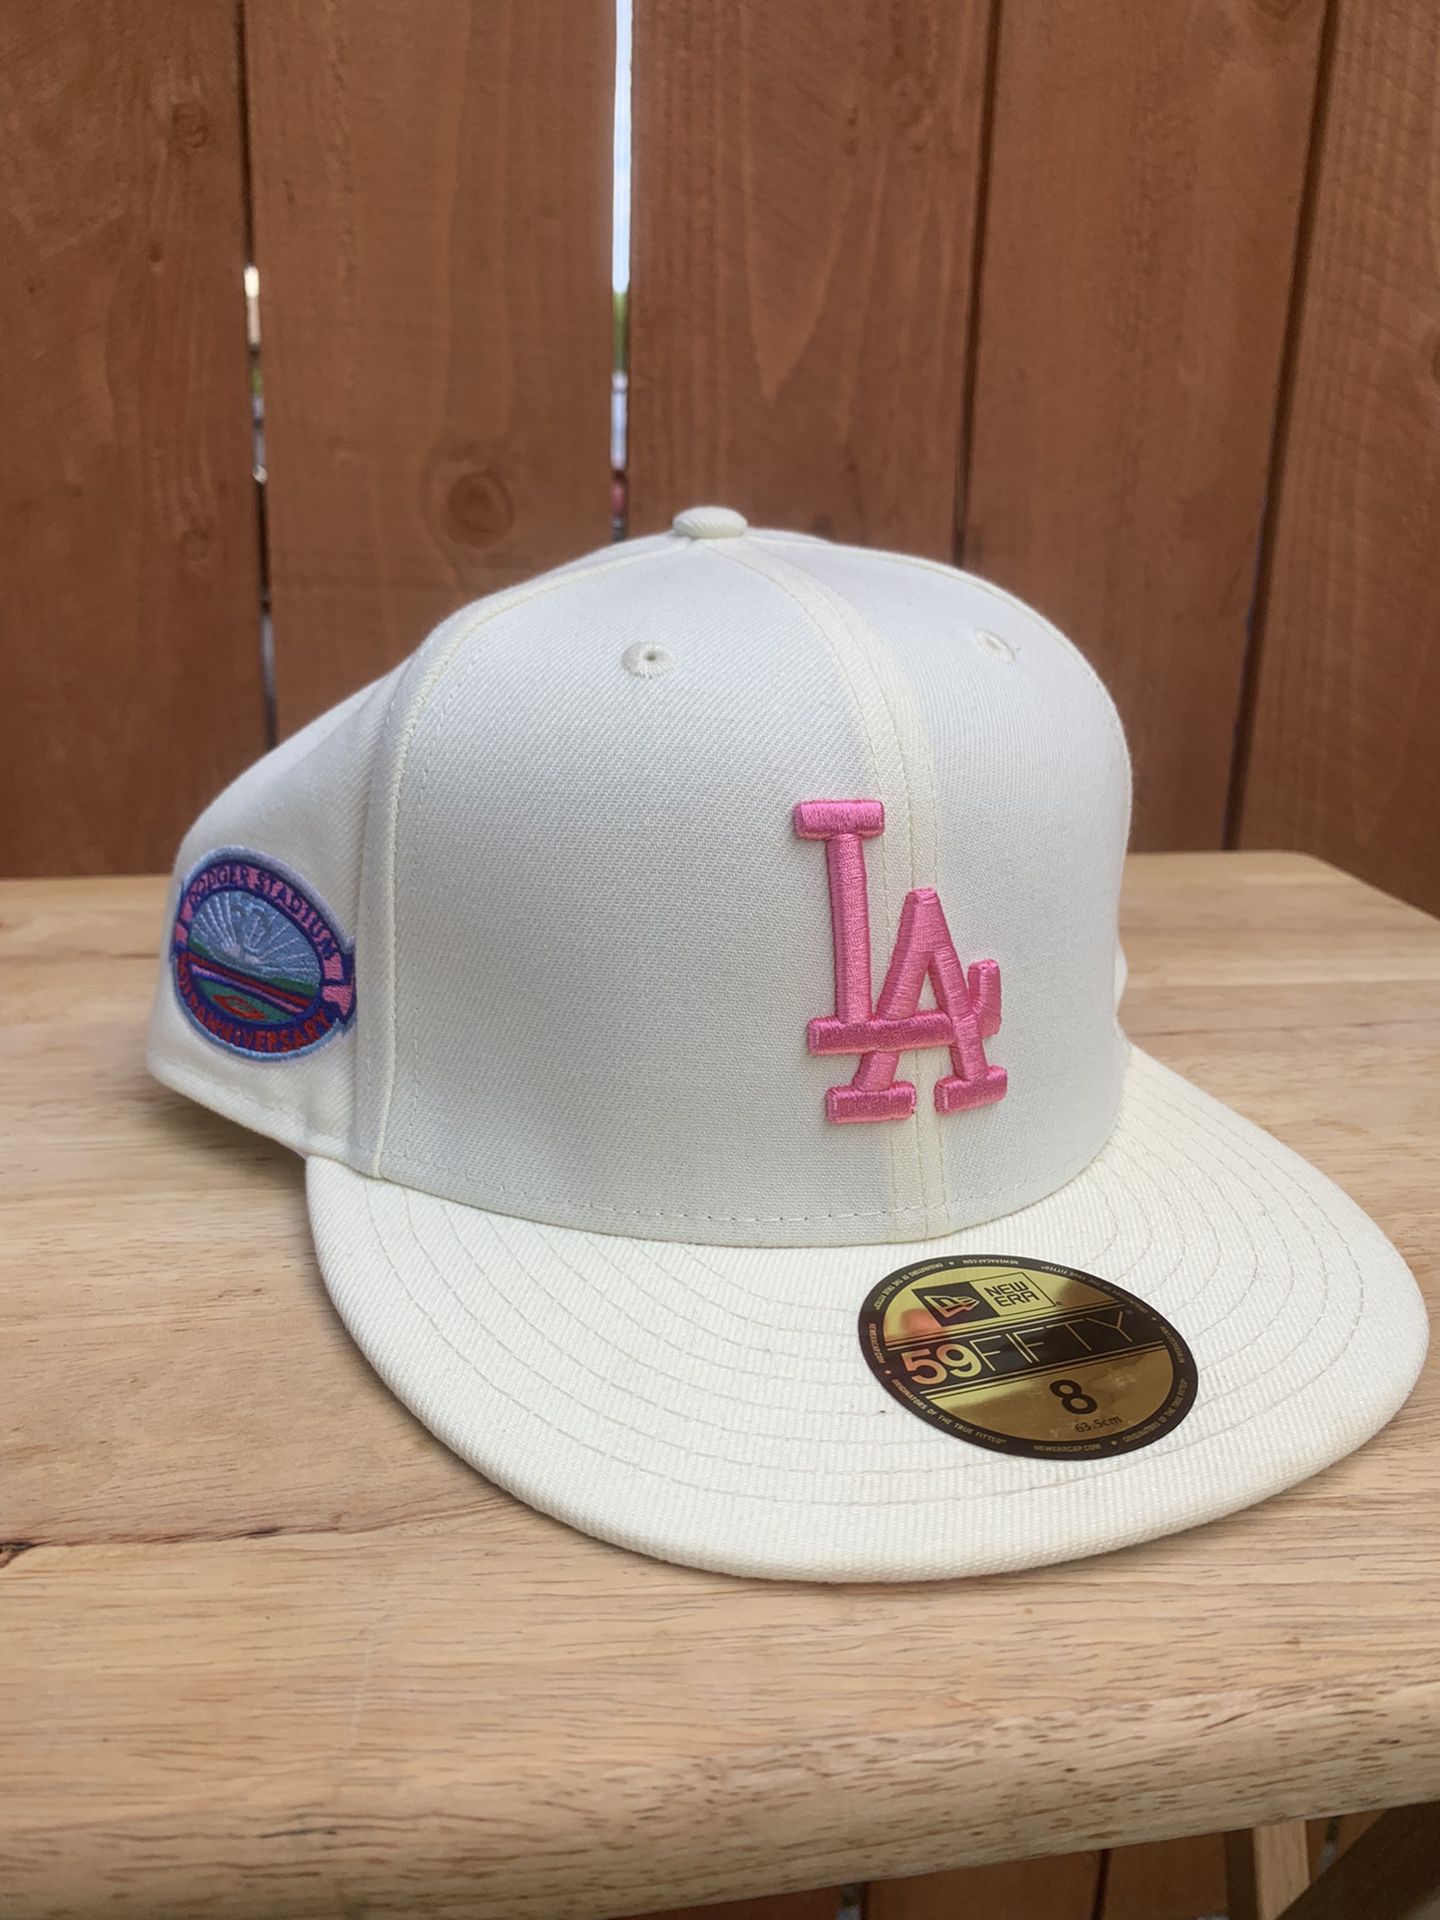 Los Angeles Dodgers Size 8 New Era Fitted Dodger Stadium 50th Anniversary Off White And Pink 59fifty